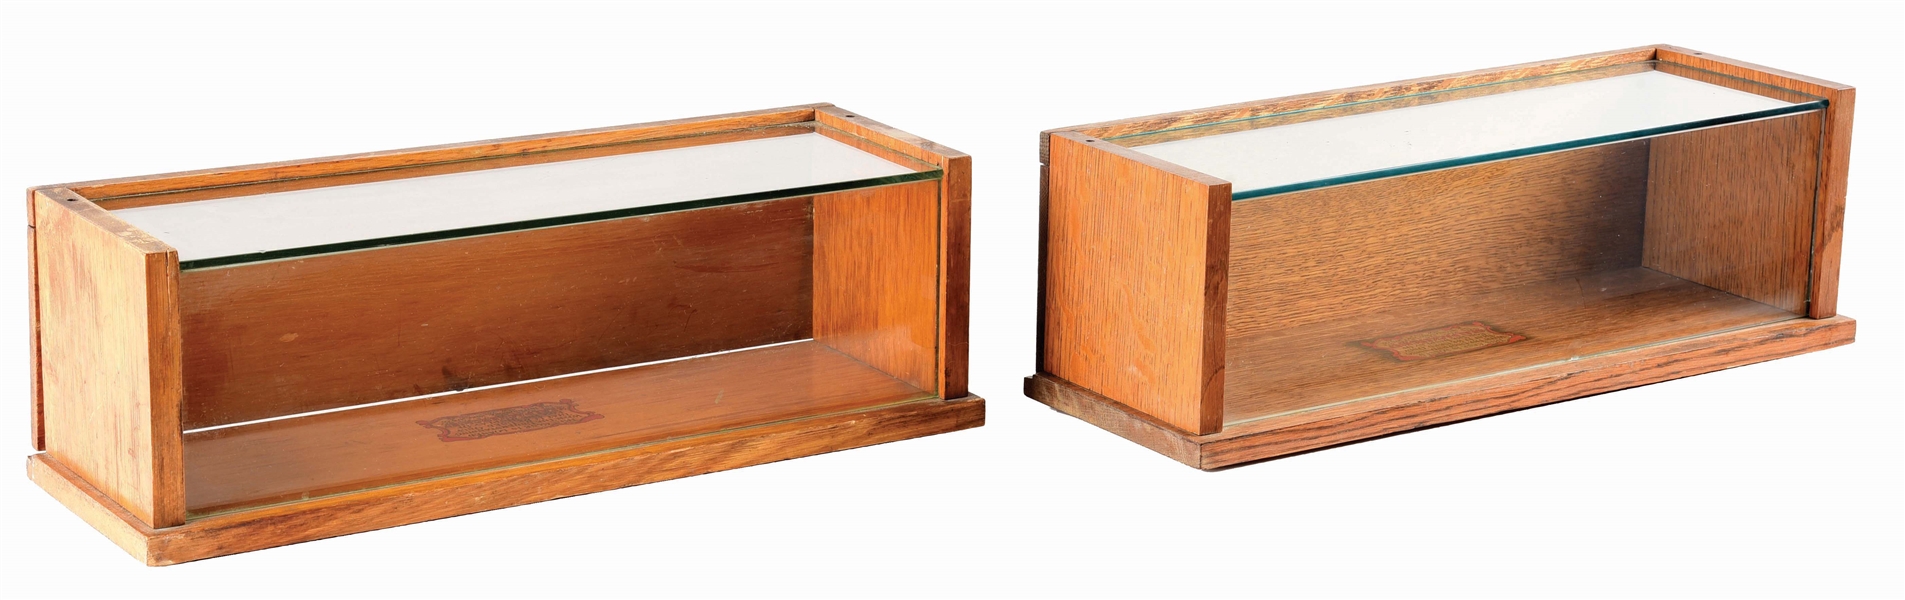 LOT OF 2: OAK AND GLASS DISPLAY CASES. 